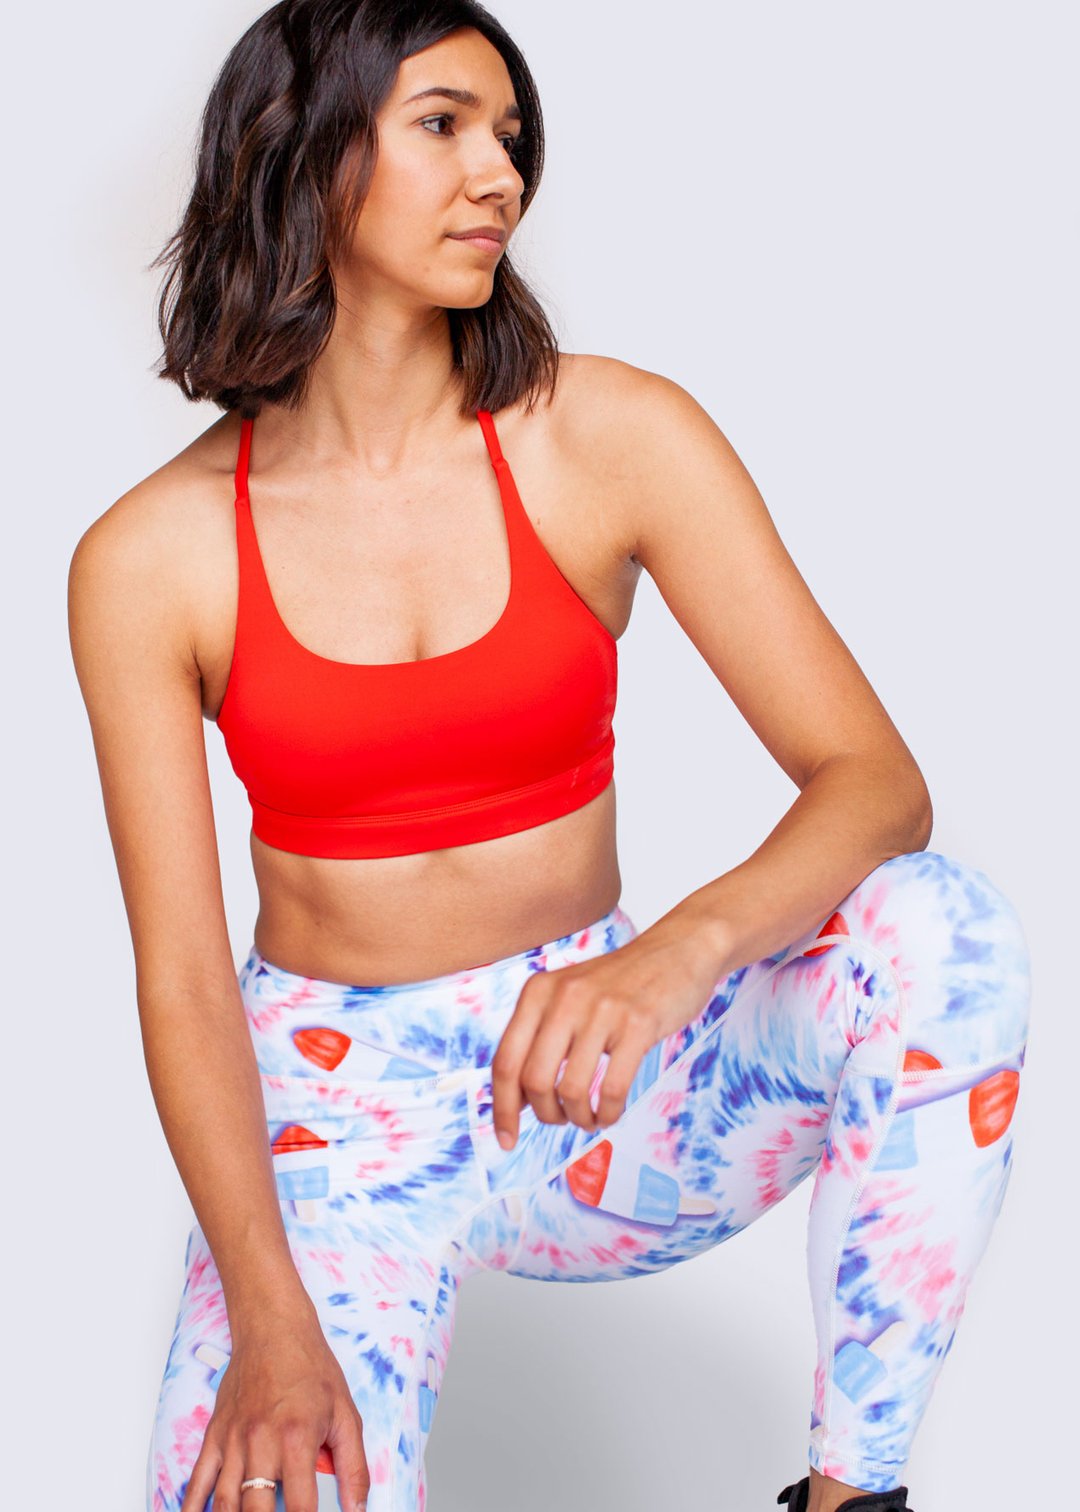 Feed Me Fight Me Rocket Pop Mid-Rise Leggings - 9 for 9